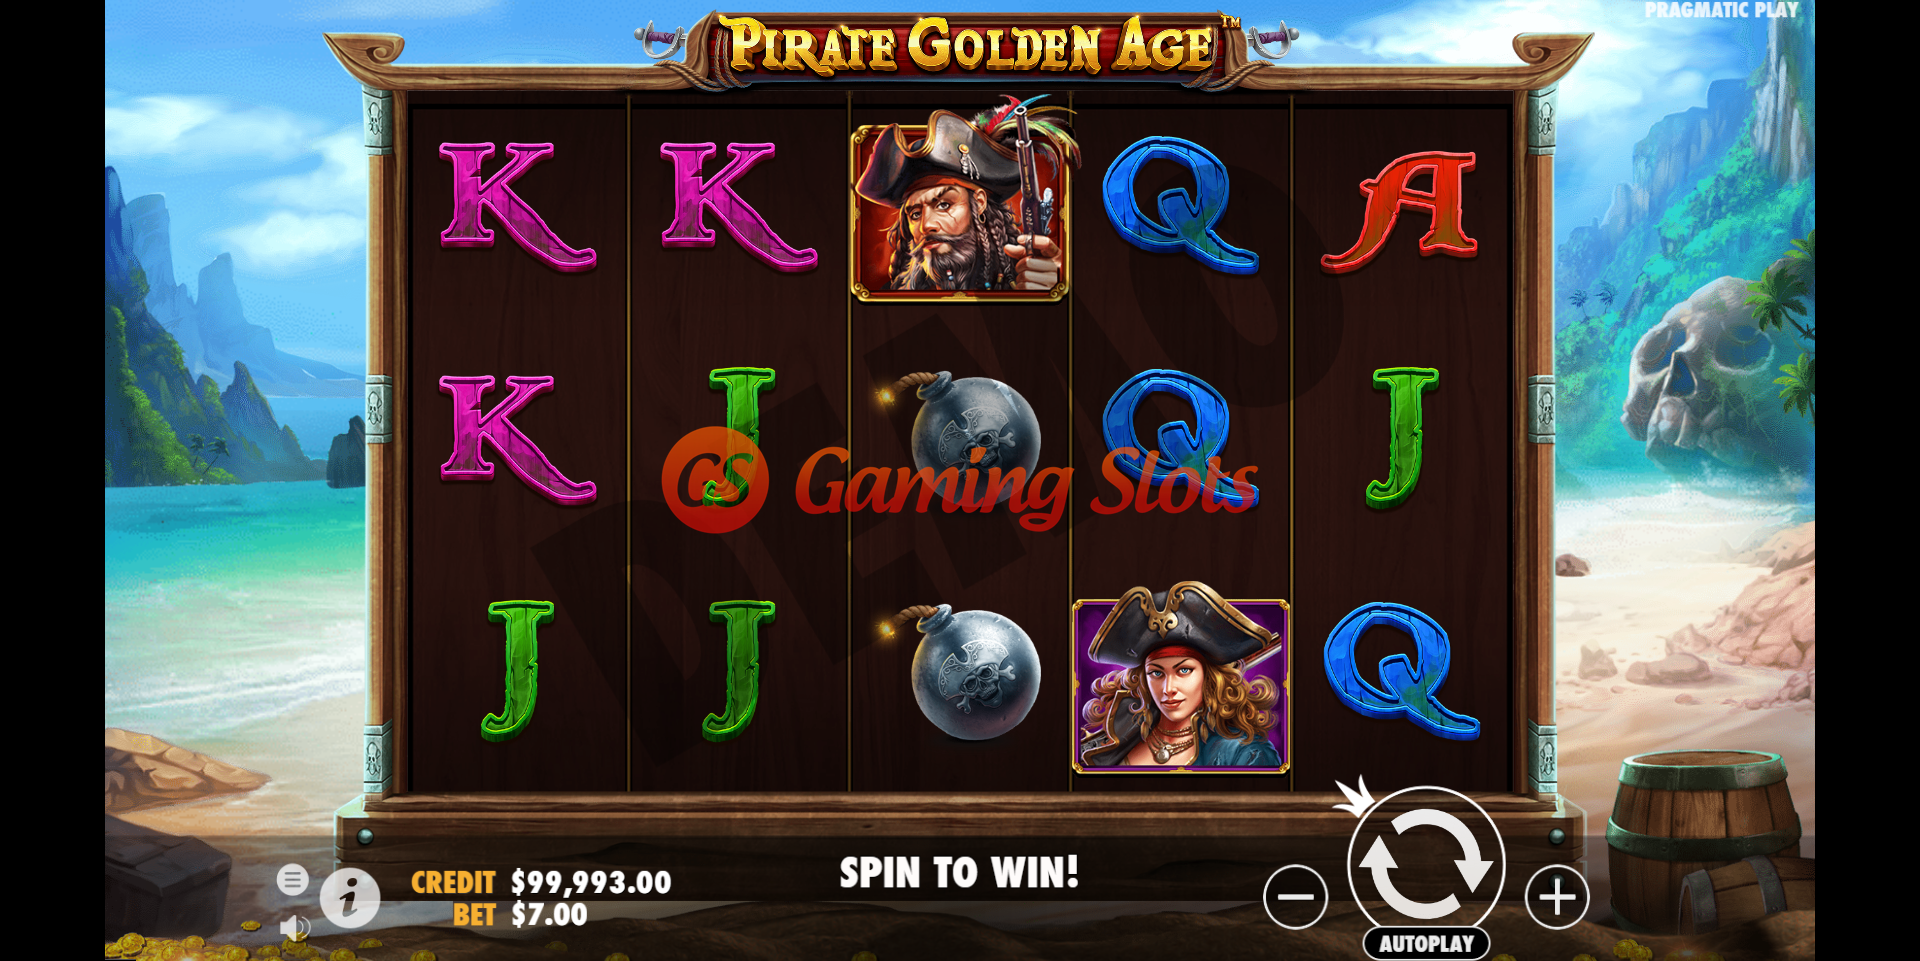 Base Game for Pirate Golden Age slot from Pragmatic Play